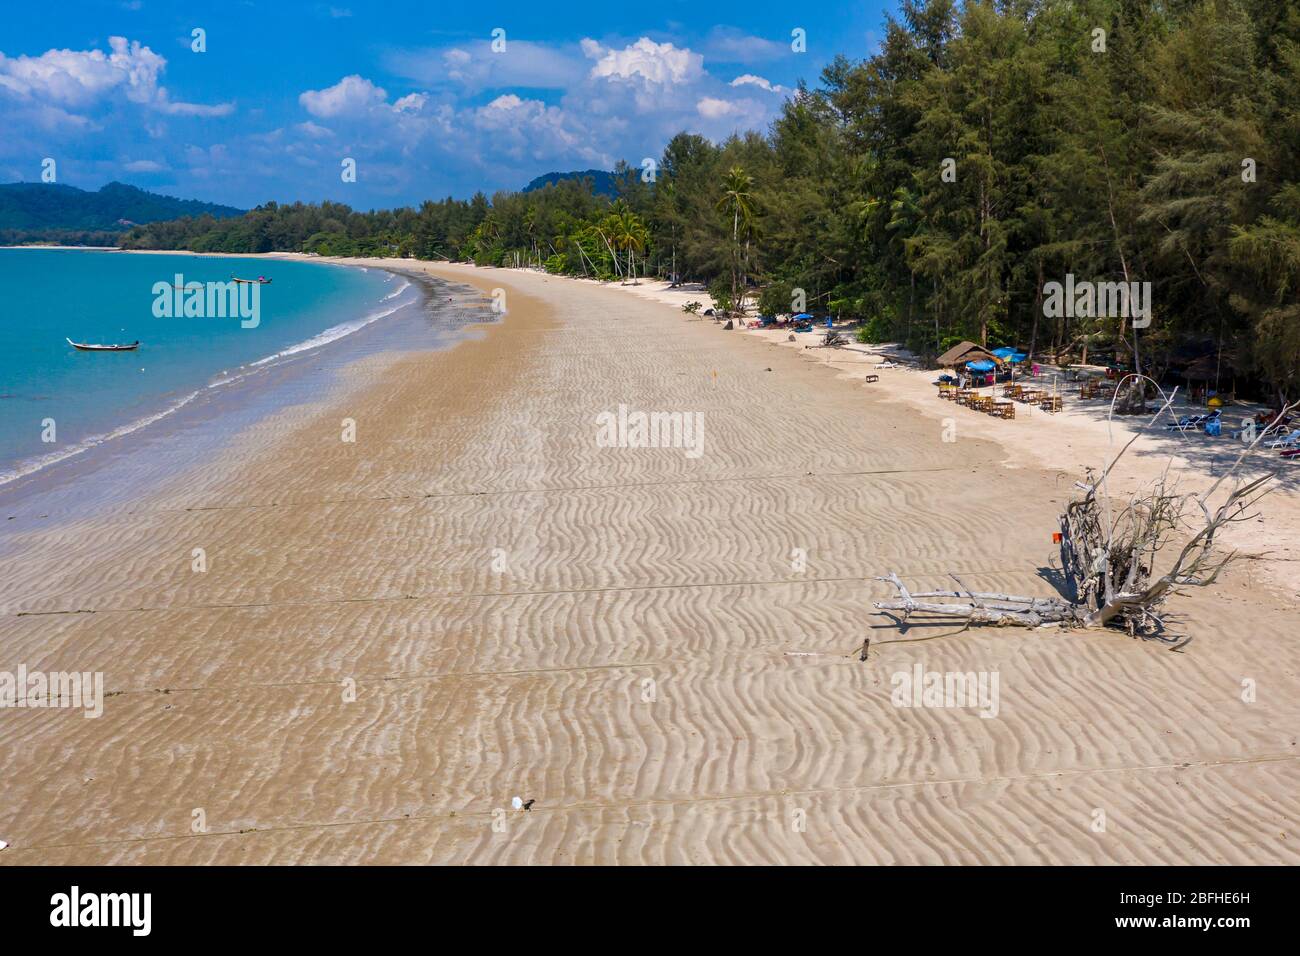 Aerial view of a deserted tropical beach in Thailand during the 2020 Coronavirus pandemic lockdown Stock Photo